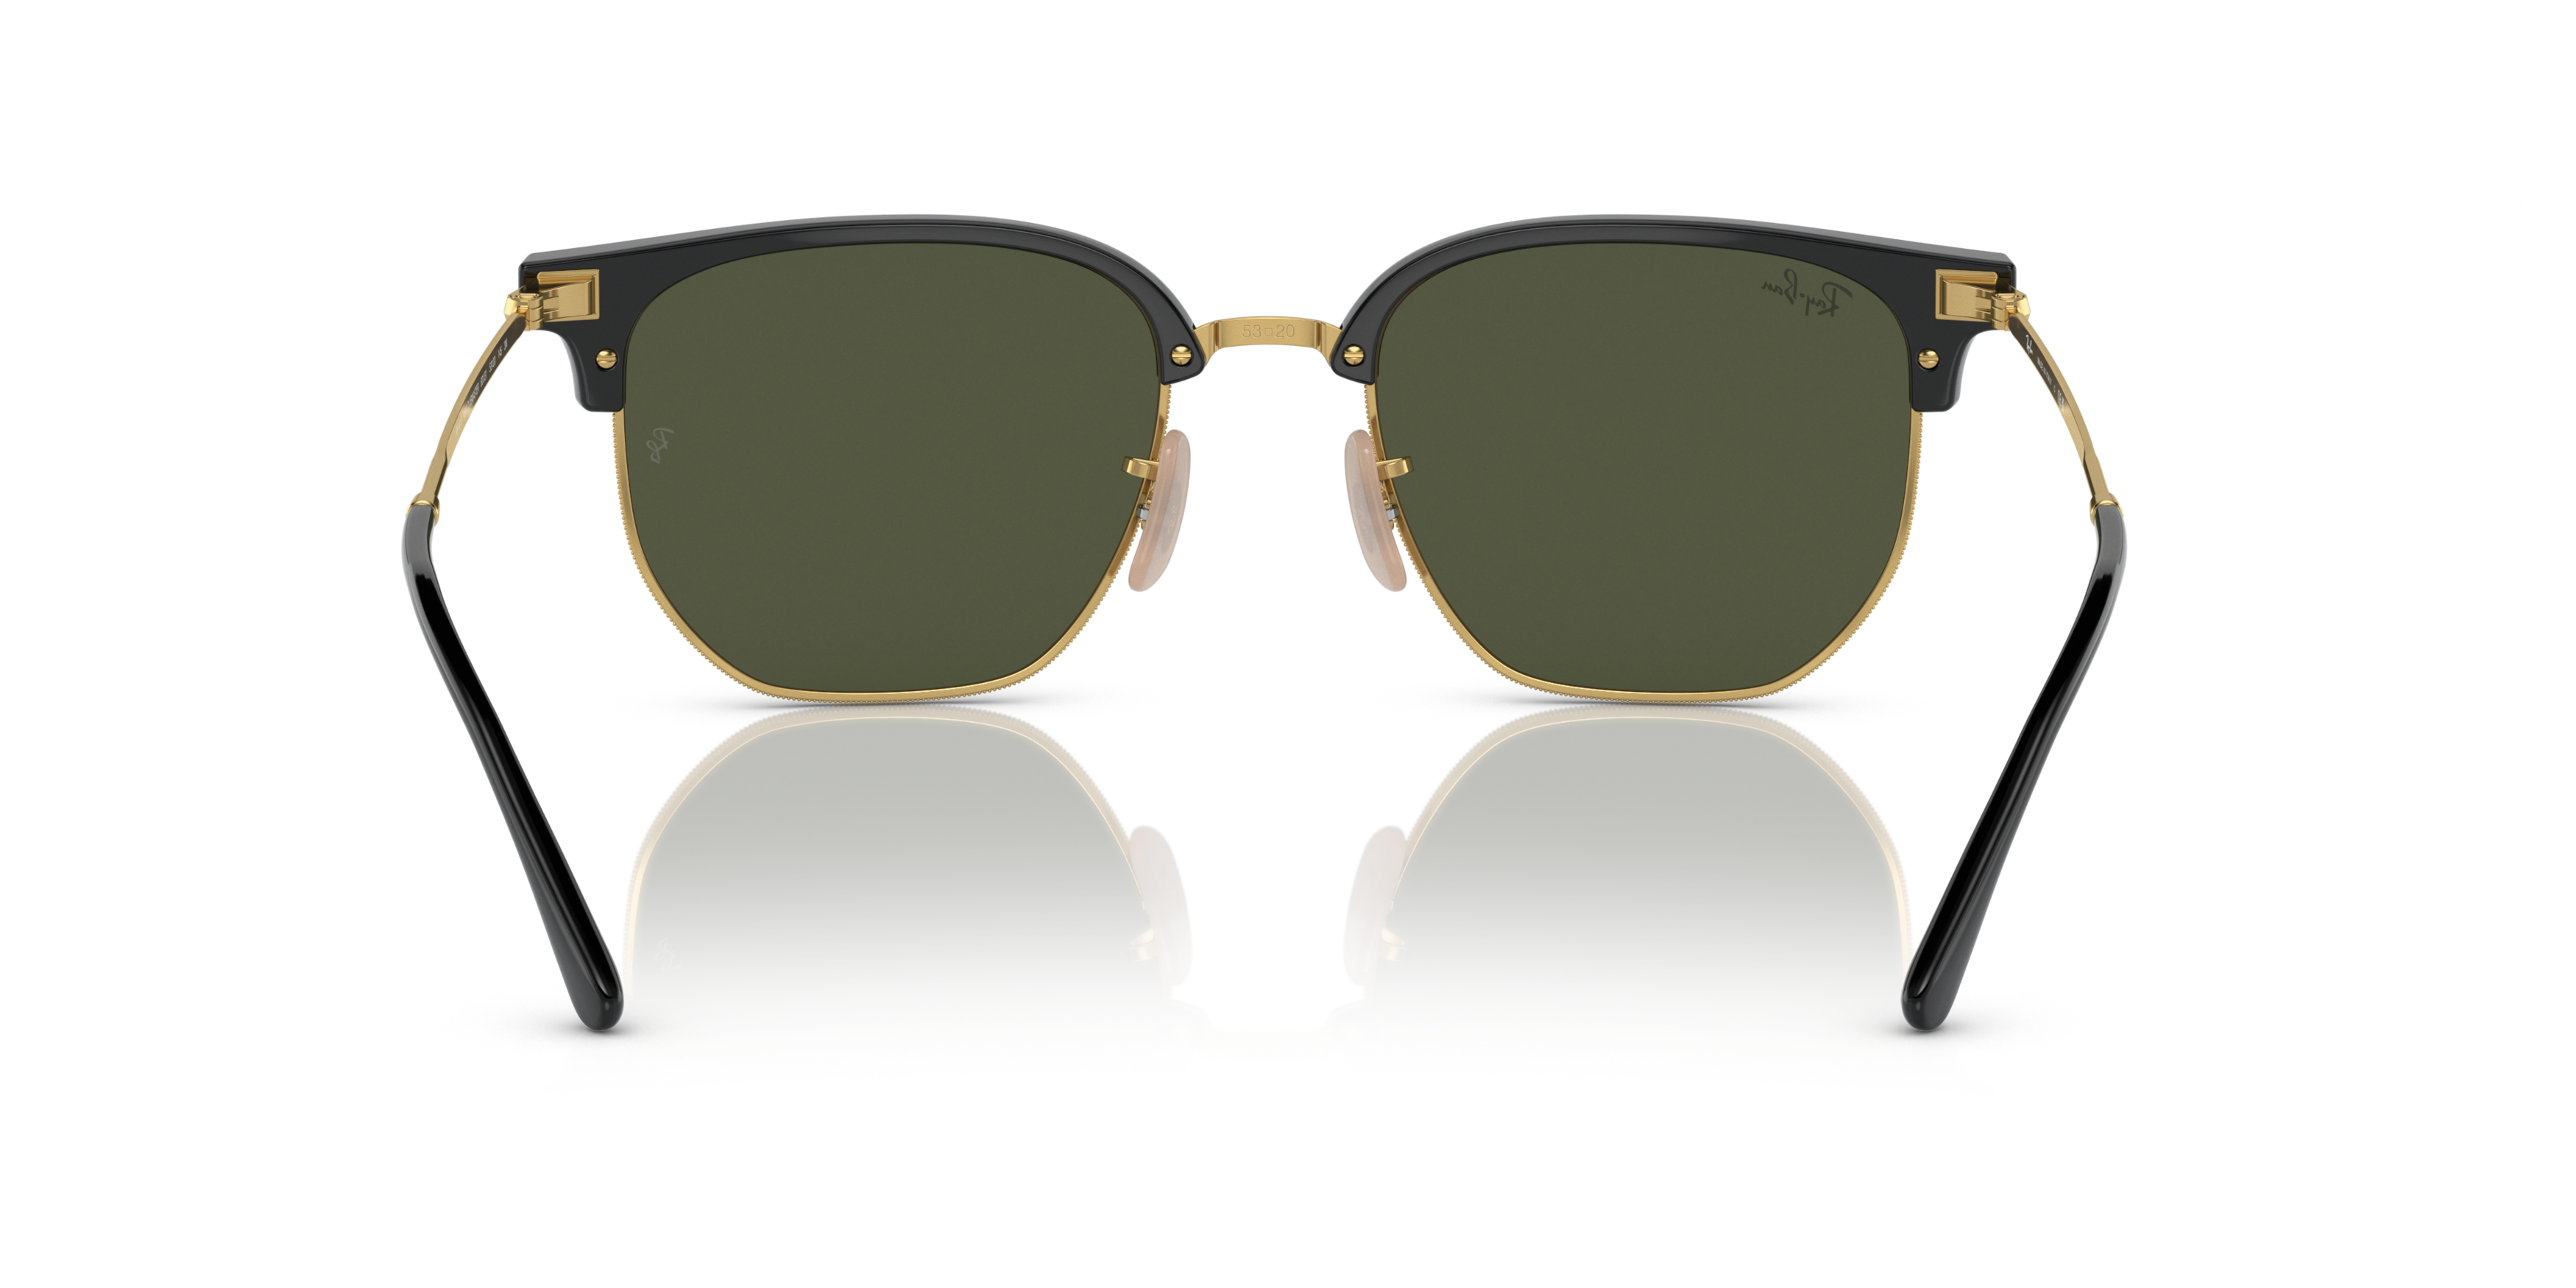 [products.image.detail02] Ray-Ban 0RB4416 601/31